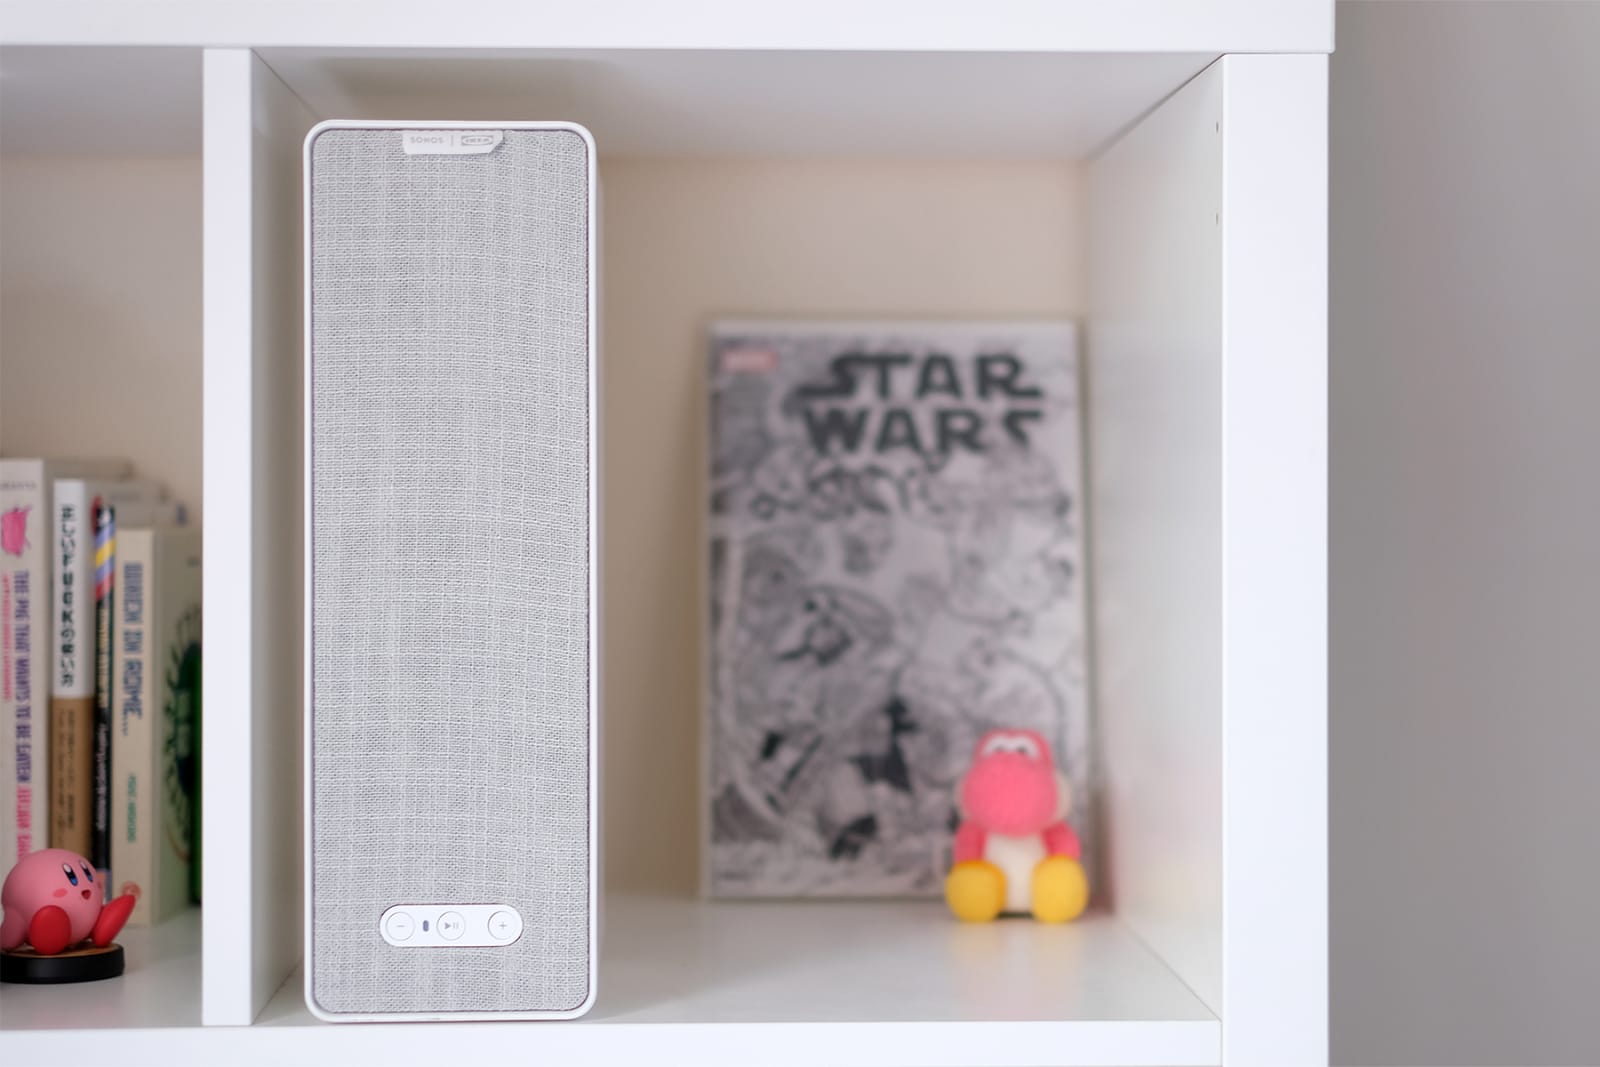 Ikea Symfonisk Review Sonos Speakers At Ikea Prices Engadget